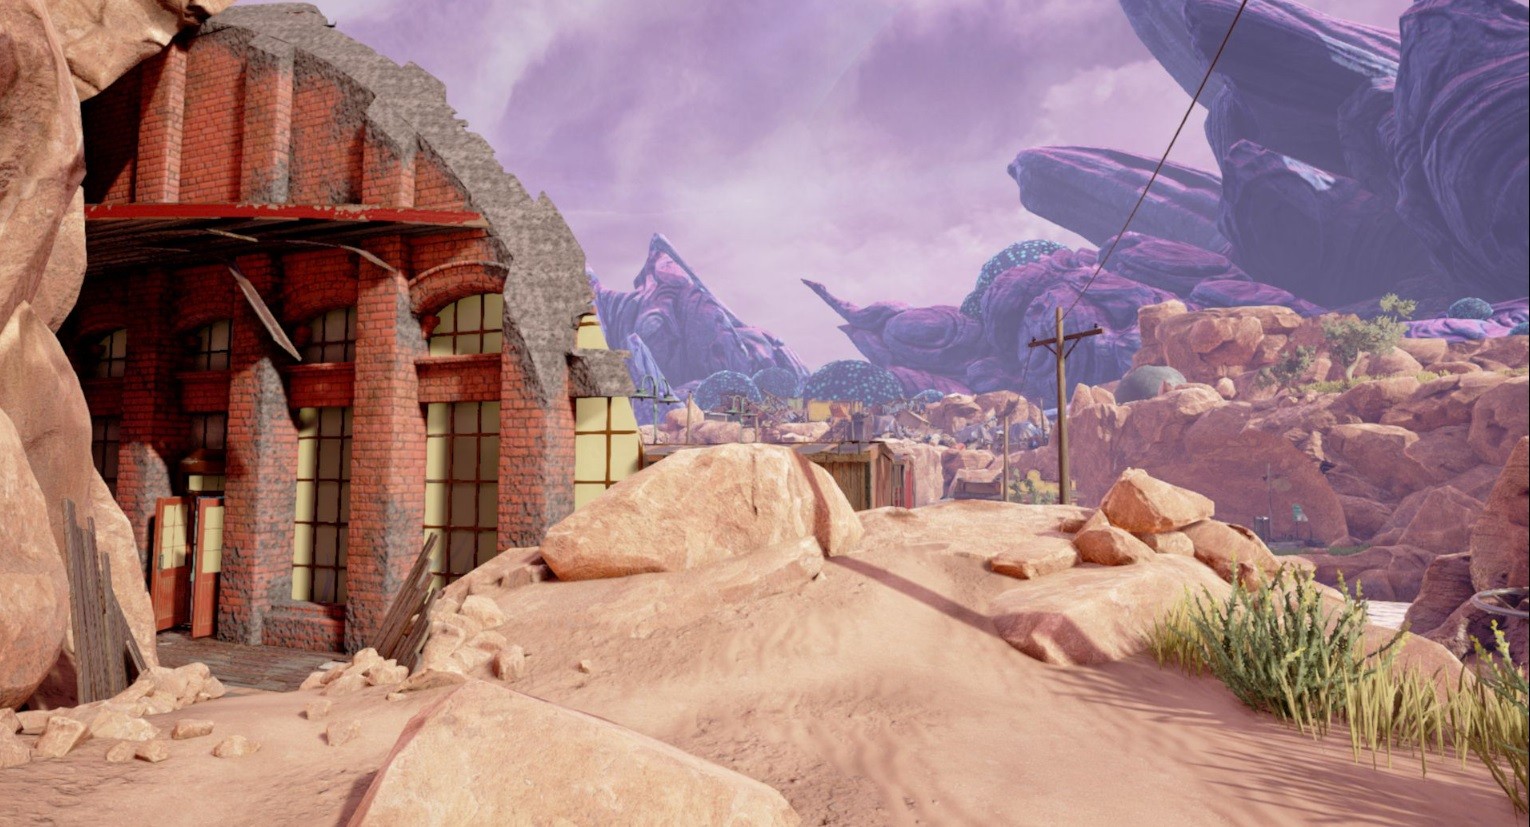 obduction video game download free